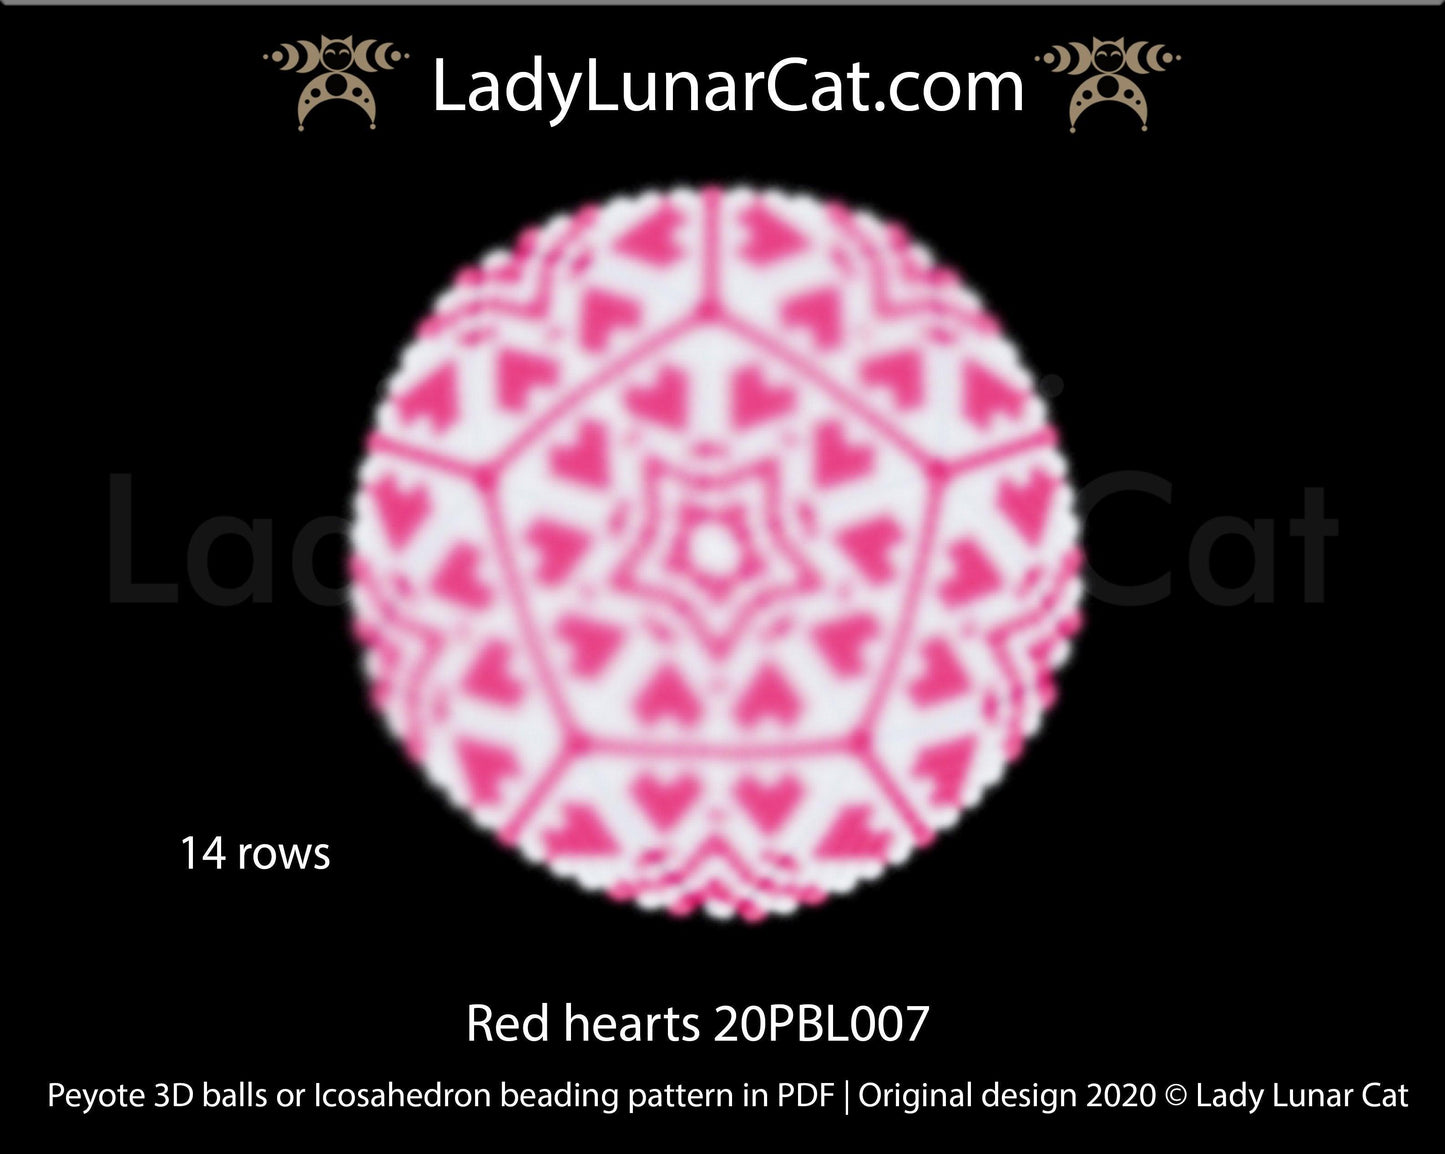 Peyote 3d ball pattern for beading | Beaded Icosahedron Red hearts 20PBL007 14 rows LadyLunarCat